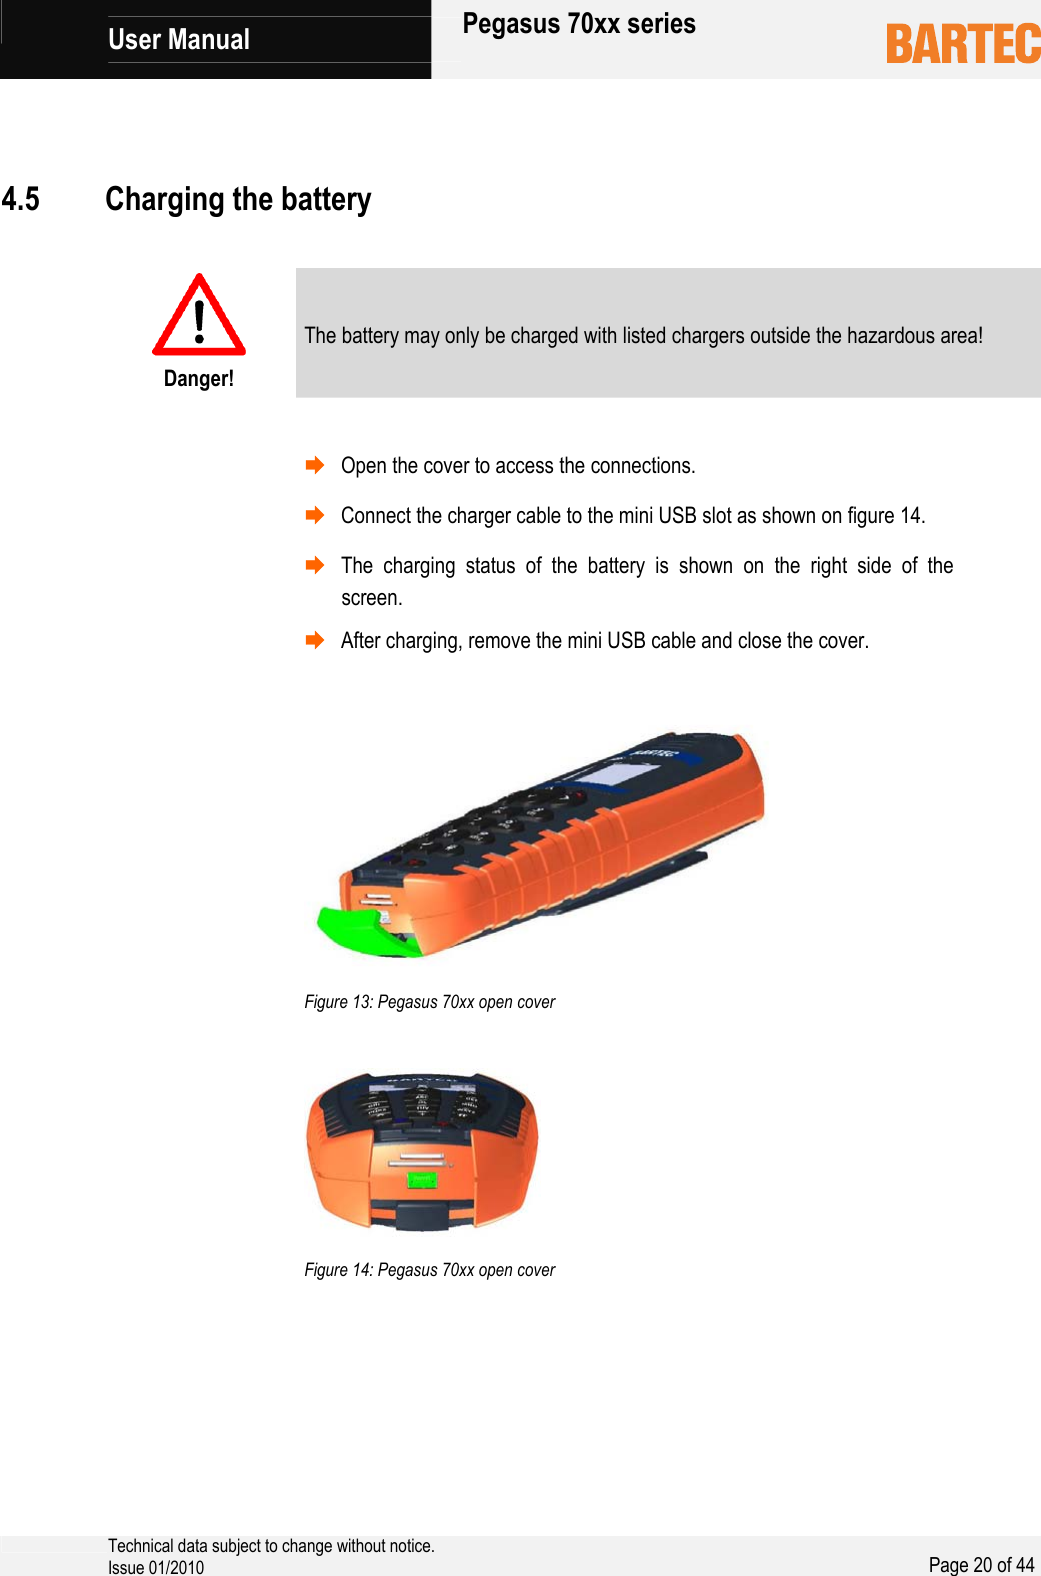             User Manual   Pegasus 70xx series     Technical data subject to change without notice. Issue 01/2010  Page 20 of 44      Danger! The battery may only be charged with listed chargers outside the hazardous area!   ¨ Open the cover to access the connections. ¨ Connect the charger cable to the mini USB slot as shown on figure 14. ¨ The charging status of the battery is shown on the right side of the screen. ¨ After charging, remove the mini USB cable and close the cover.     Figure 13: Pegasus 70xx open cover     Figure 14: Pegasus 70xx open cover  4.5 Charging the battery